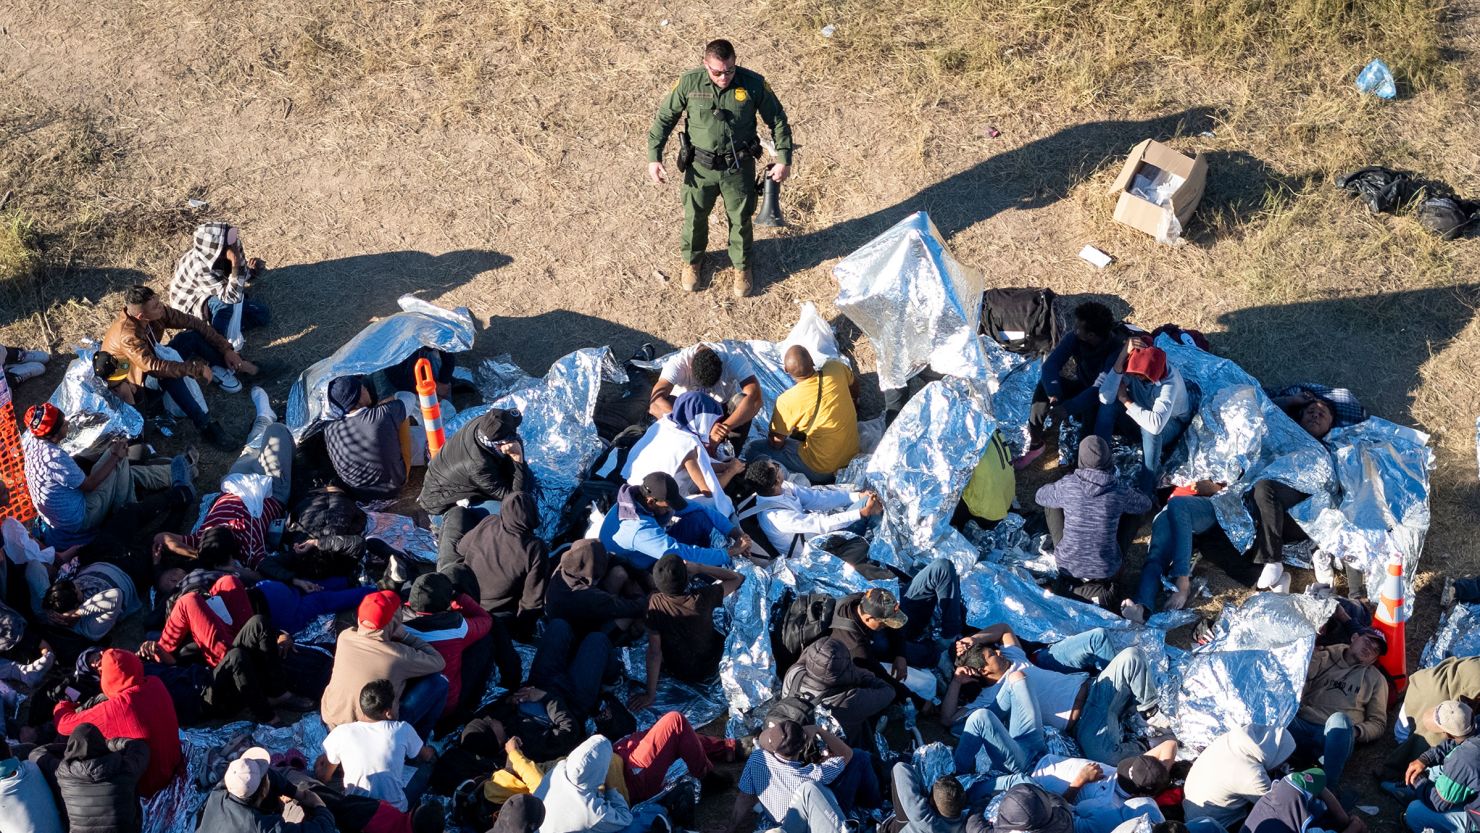 A US Border Patrol agent speaks with immigrants waiting to be processed after crossing from Mexico into the United States on December 17, in Eagle Pass, Texas. 